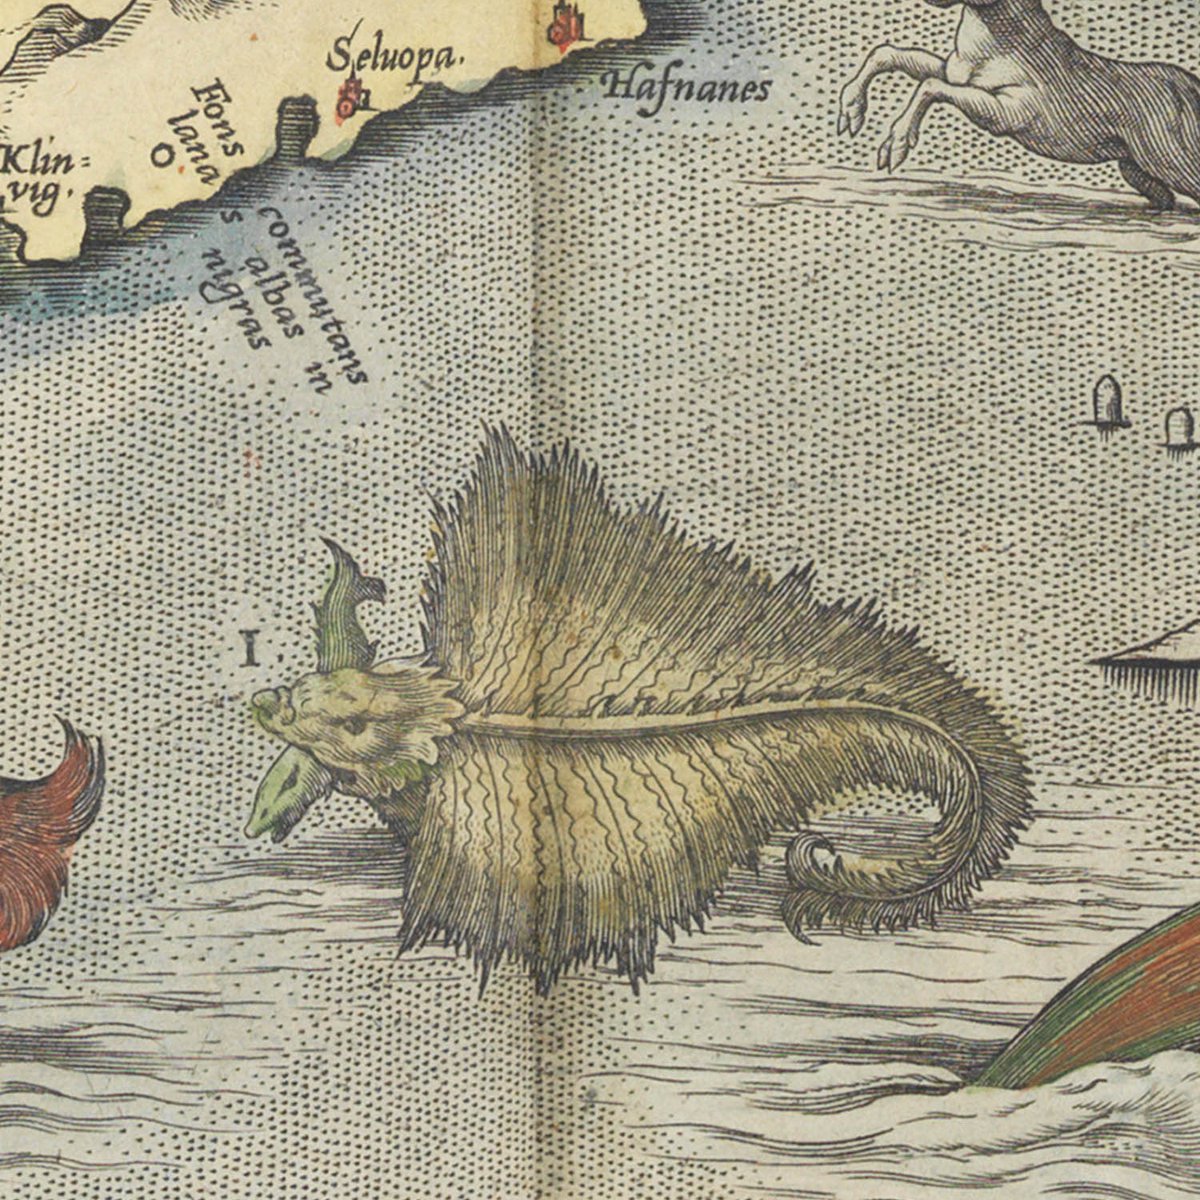 SEA MONSTER 9: The Skautuhvalurm. It is somewhat like a ray or skaite but an infinite deal bigger: when it appeareth it is like an island, and with his finnes overturns shippes and boates.